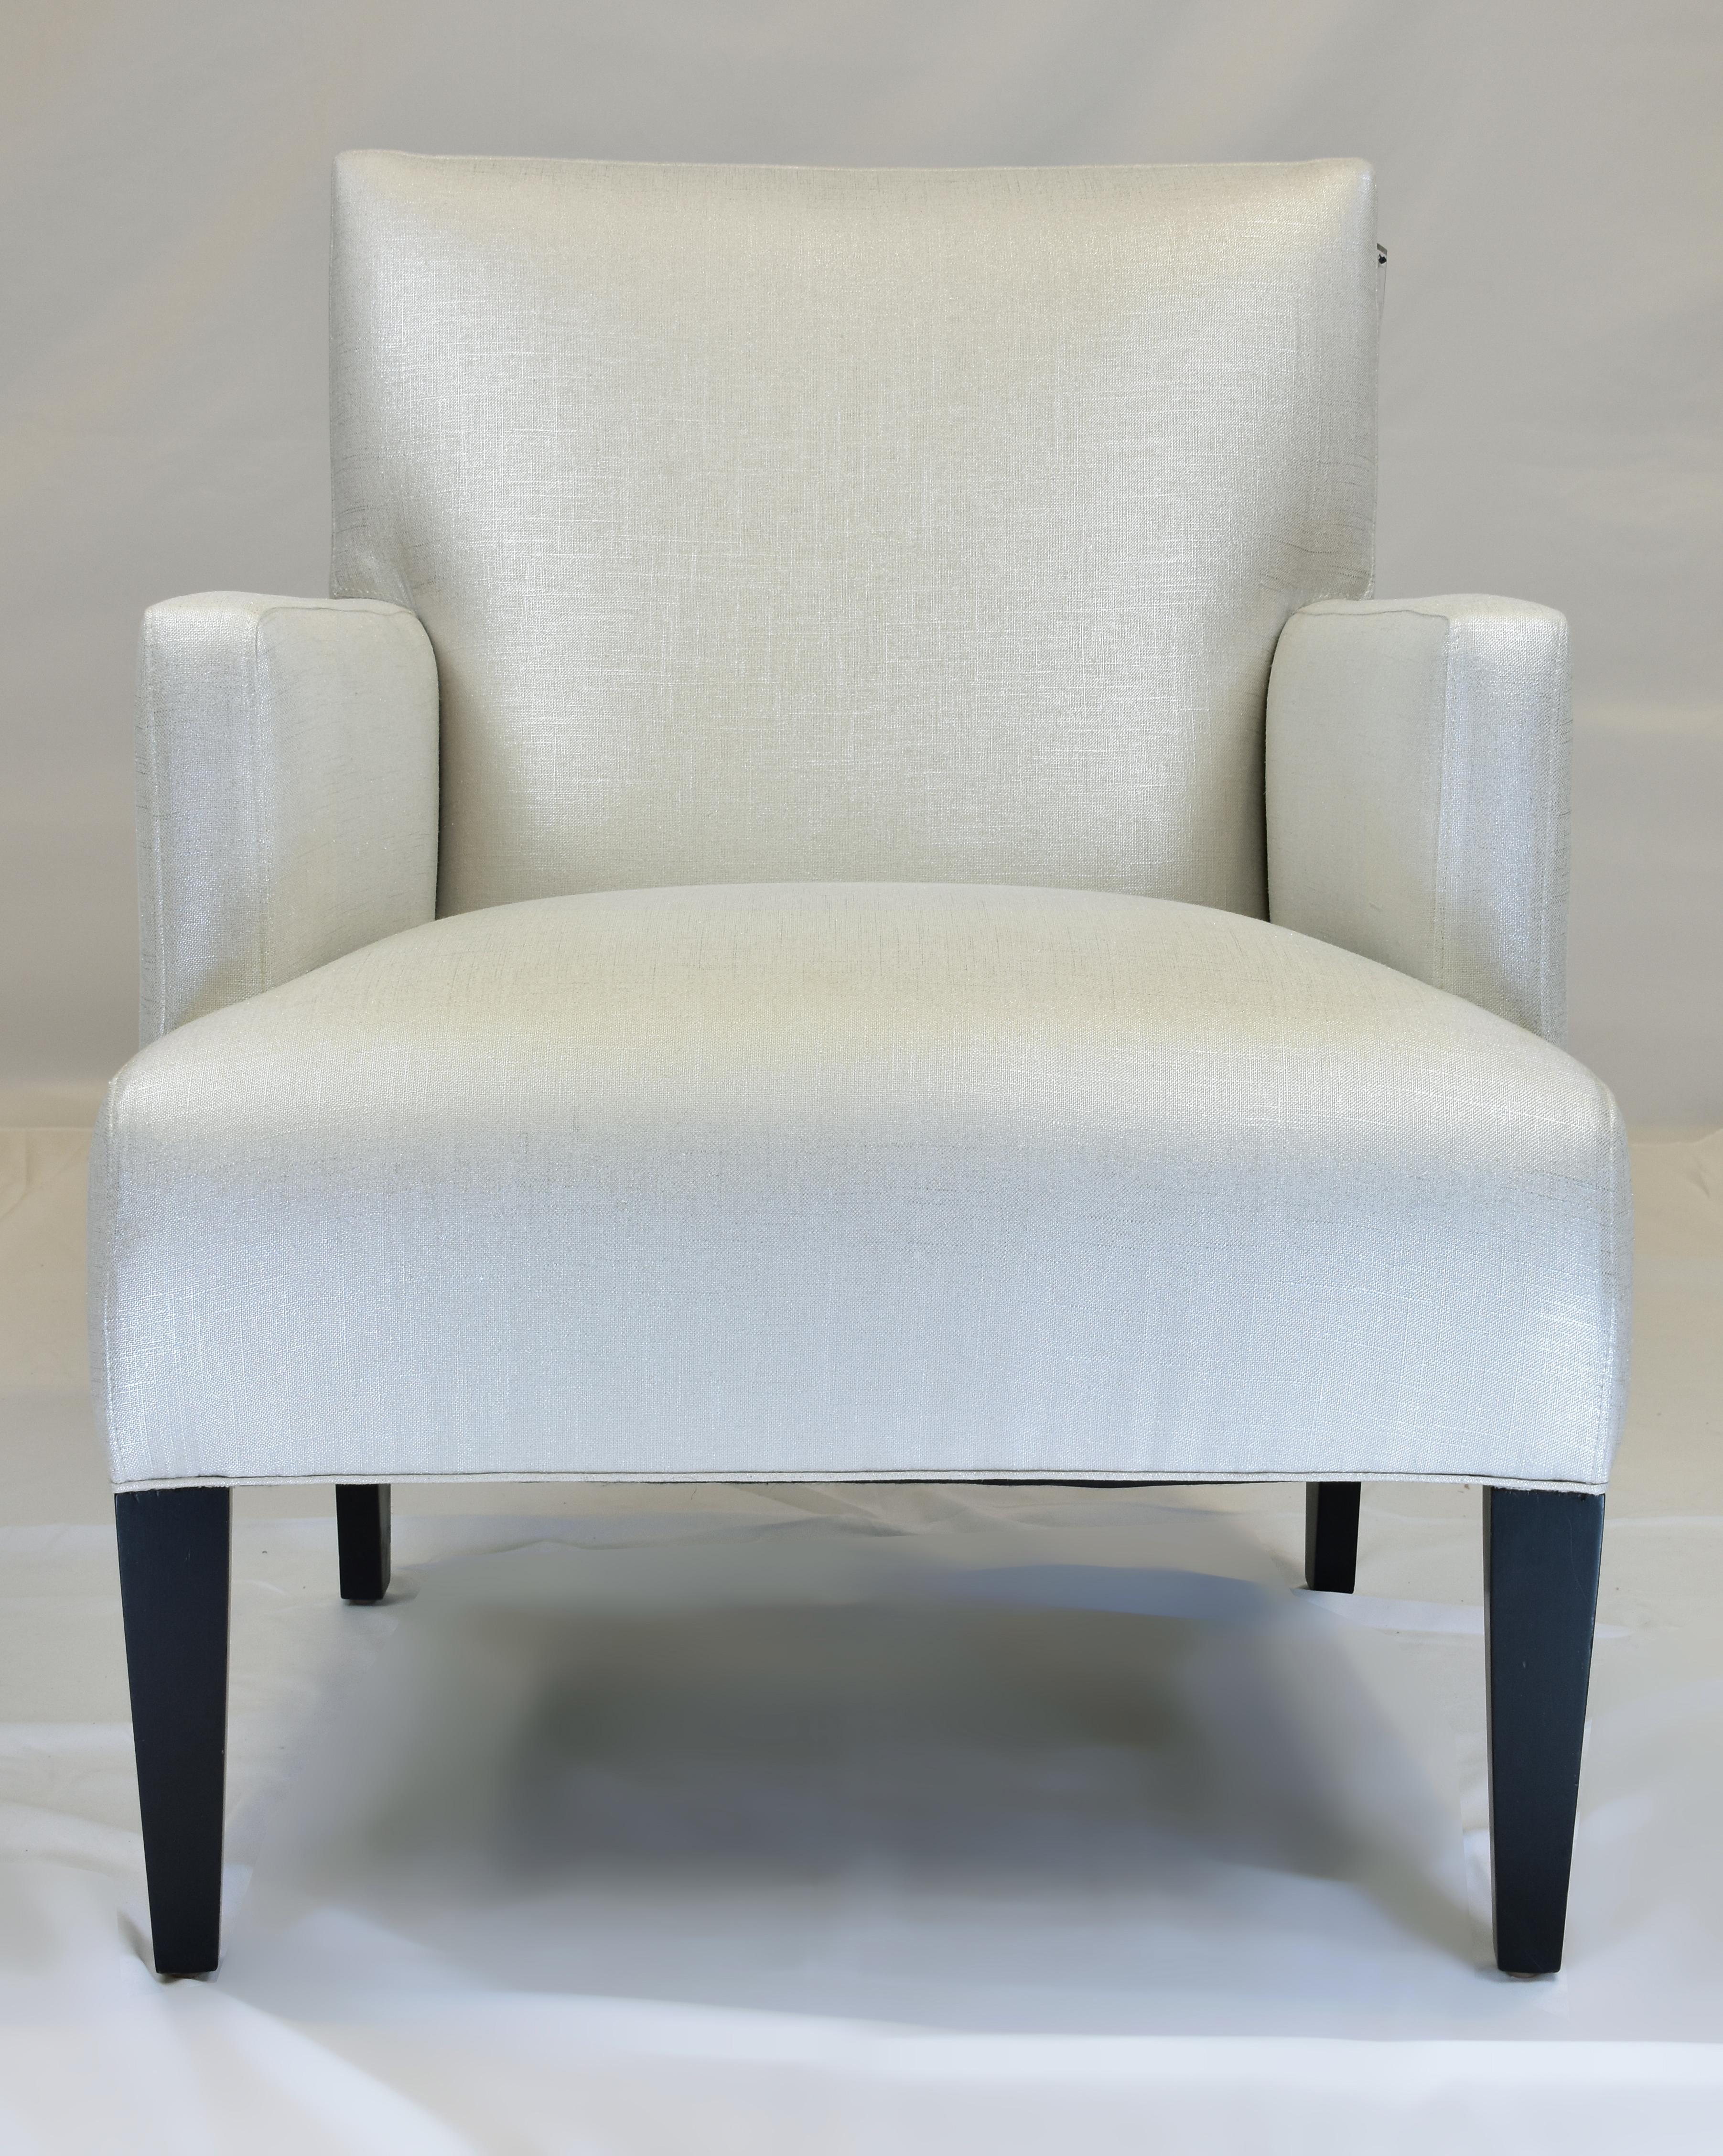 Le Jeune Upholstery Jasmine Armchair Showroom Model

Offered for sale is a Le Jeune Upholstery Jasmine C21.923 Chair showroom model. The chair has a medium-scaled frame with a modern design that blends well with most decorations. The arms are boxed